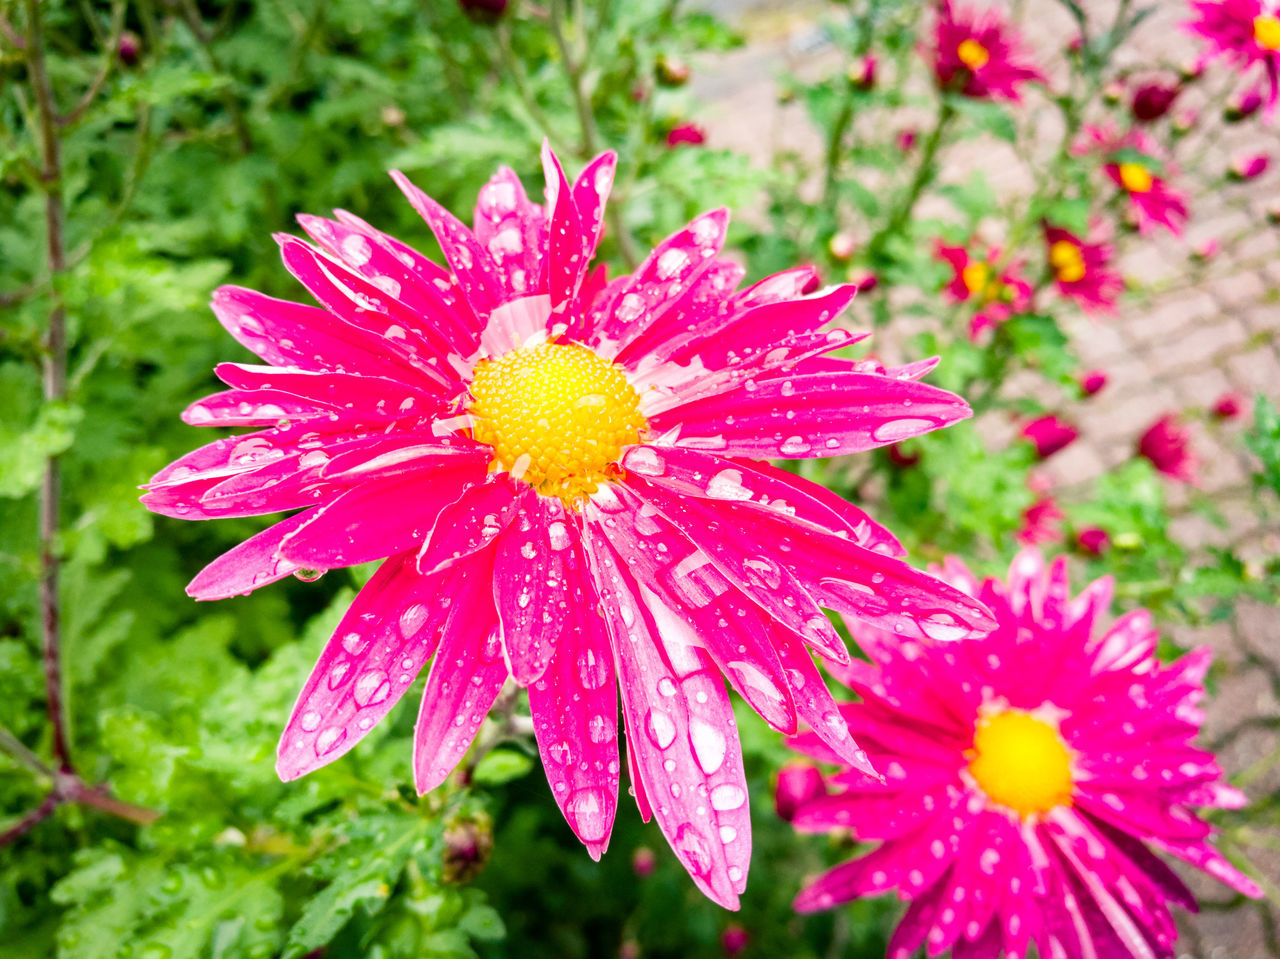 CLOSE-UP OF RAINDROPS ON PINK DAISY FLOWER